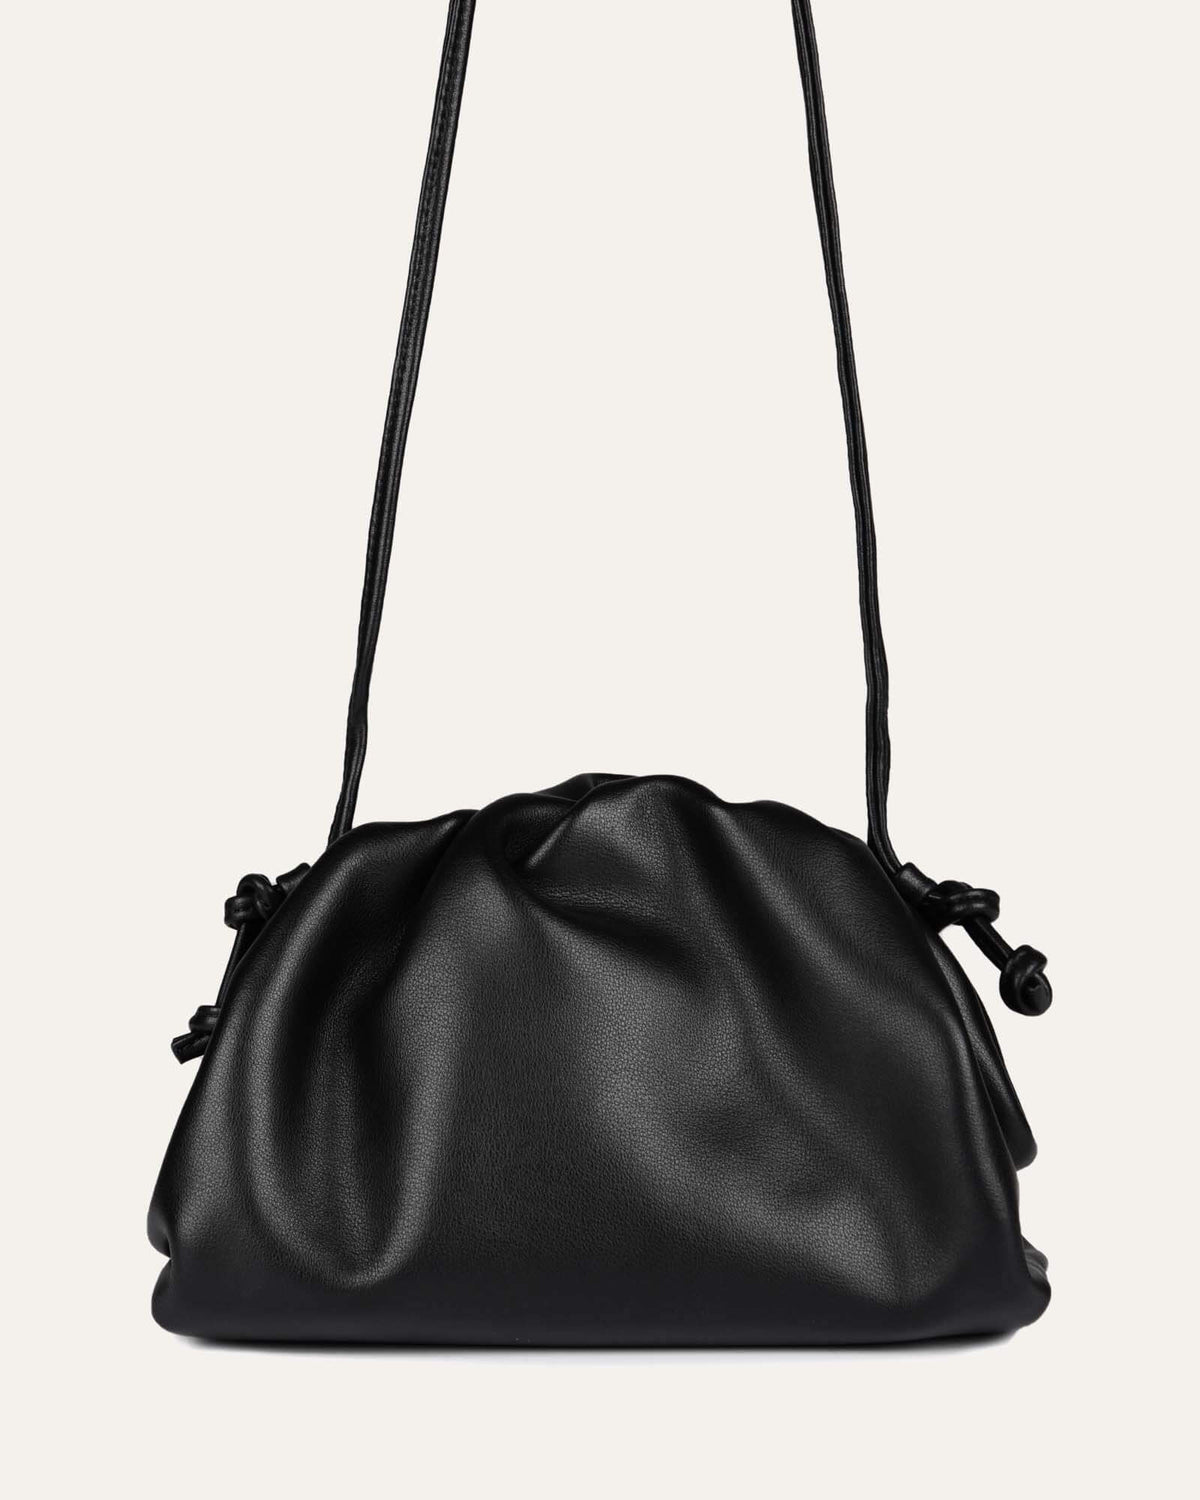 BAMBIE CROSS BODY BAG BLACK LEATHER